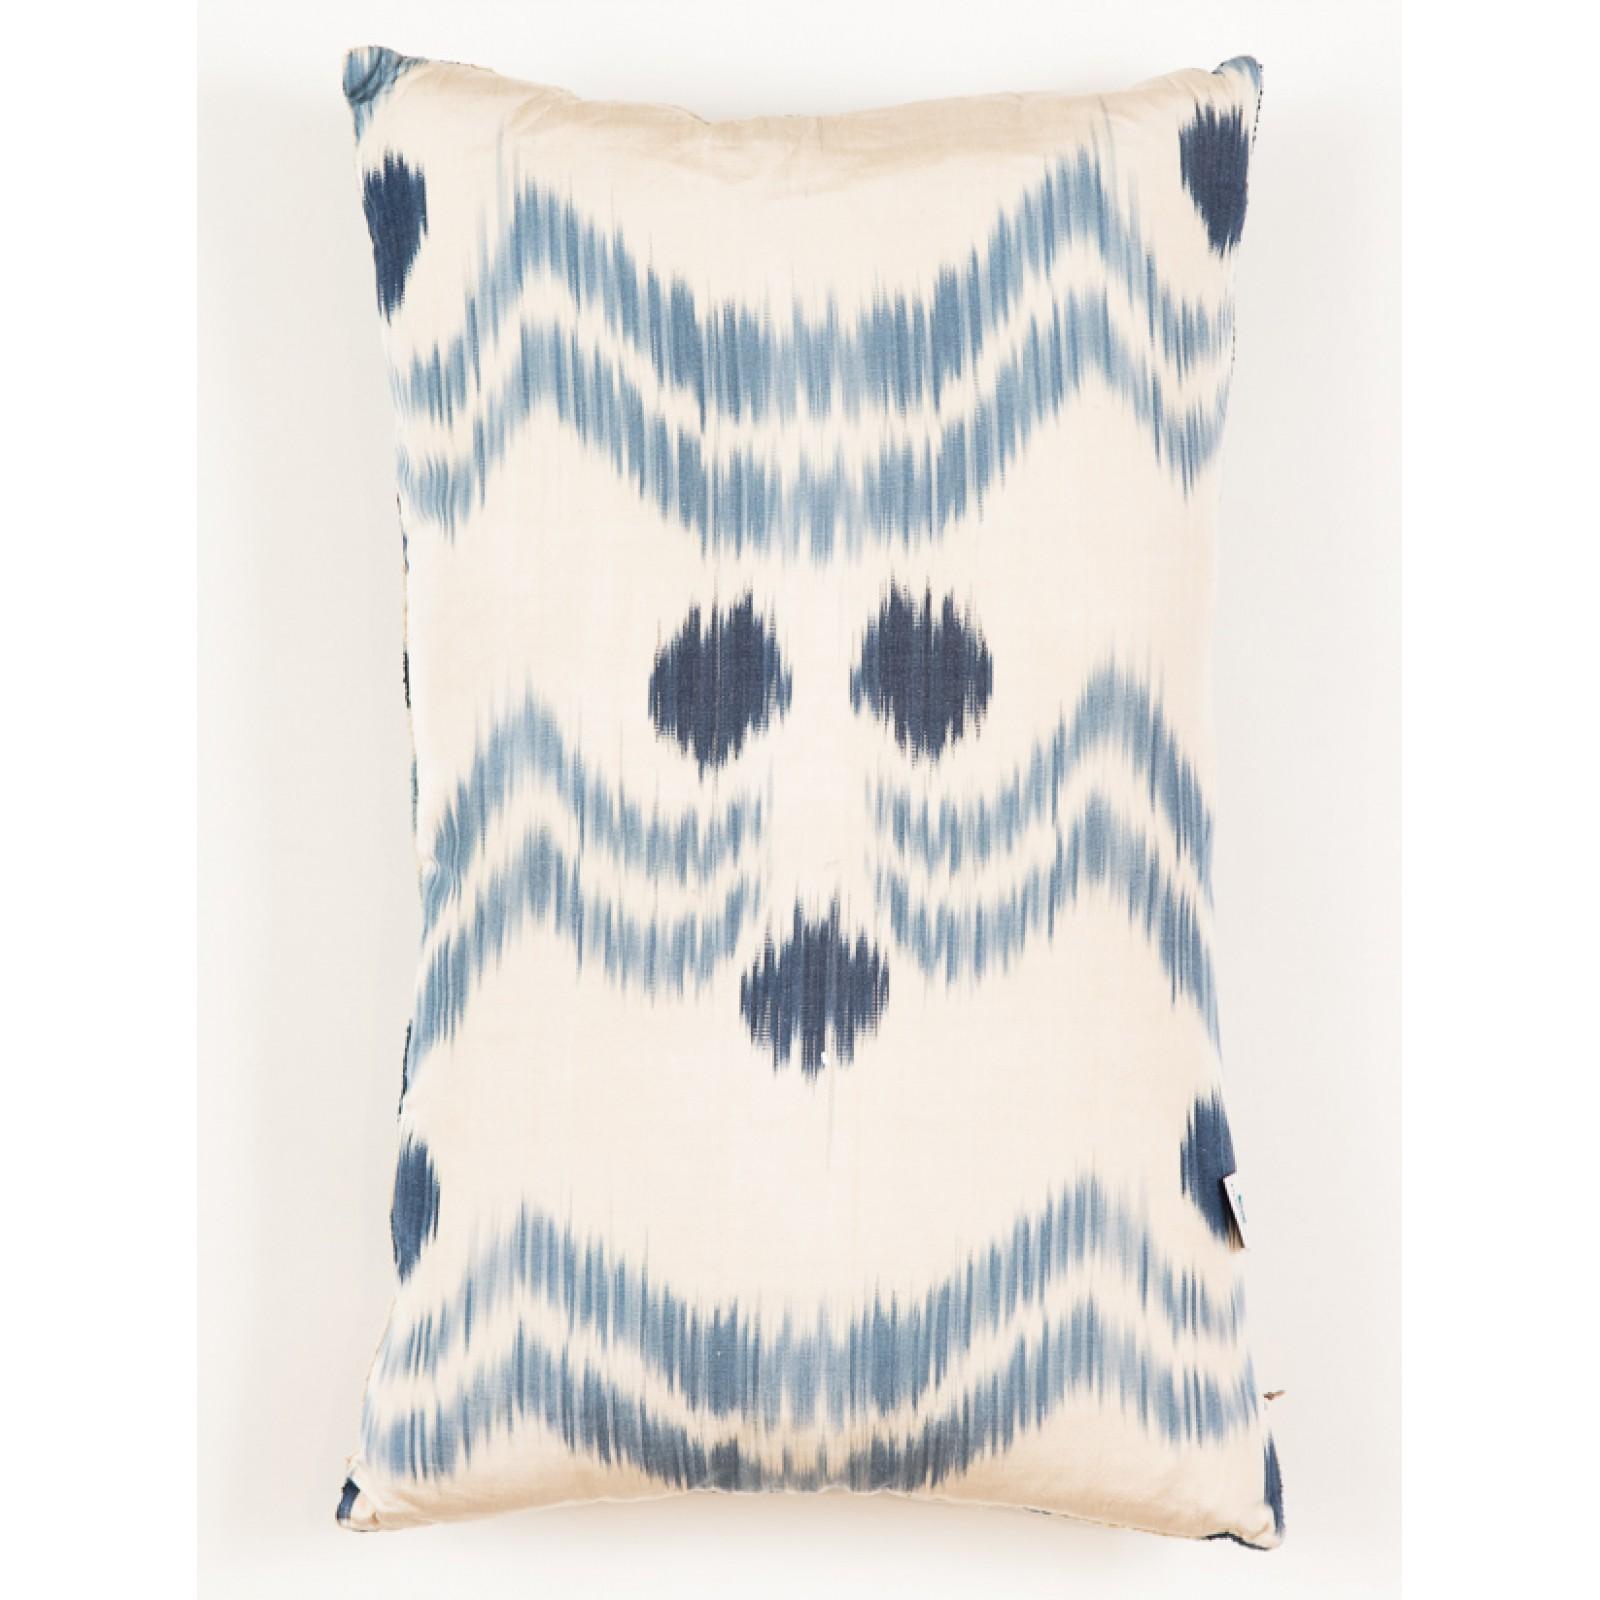 Velvet ikat cushions with rich design and high quality, carefully made one by one in Uzbekistan in Central Asia.

One side is hand-woven silk velvet (velvet), and the other side is hand-woven silk cloth (ikat). All are dyed with natural dyes.
The